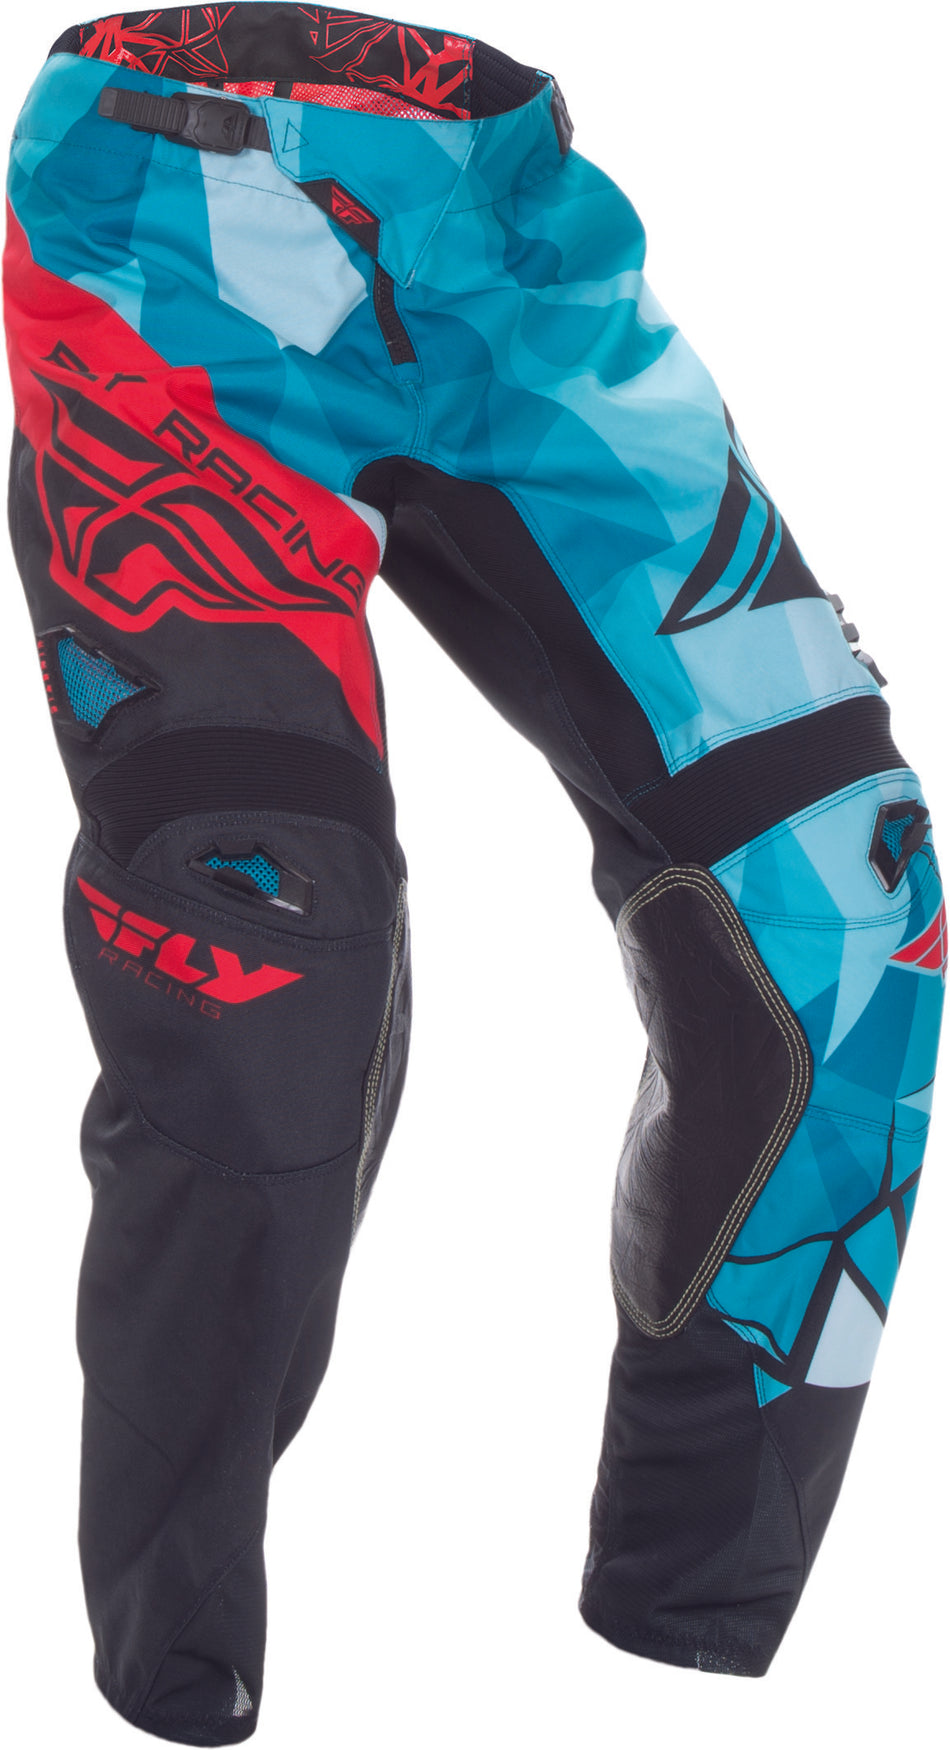 FLY RACING Kinetic Crux Pant Teal/Red Sz 18 370-53918